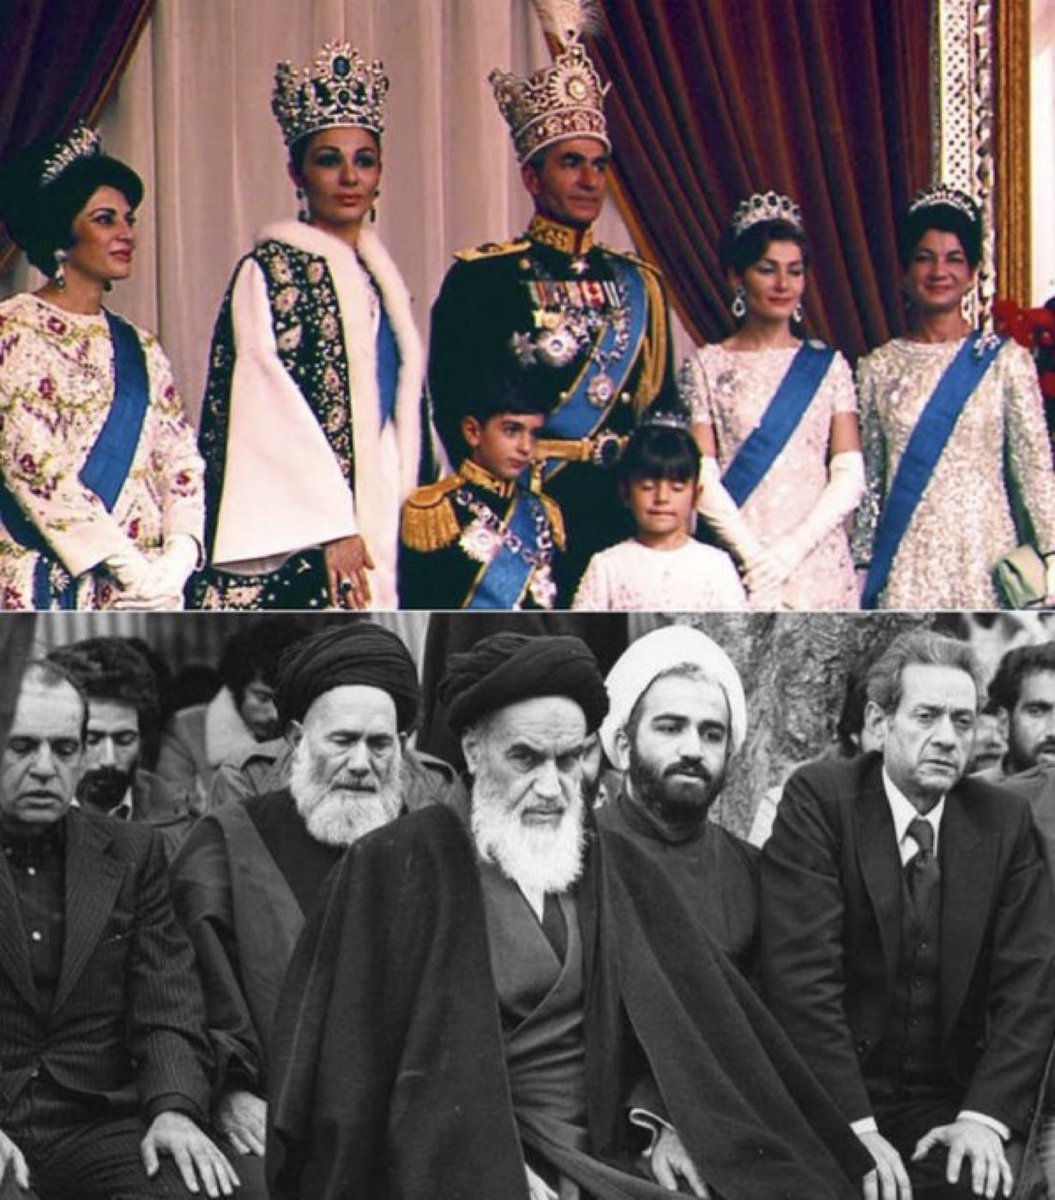 Iran was a thriving westernized society under the rule of the Shah. Women were free to dress how they wanted and live life without restrictions. Since 1979, under the Islamic Regime, thousands of women have been killed for not wearing a headscarf and for demanding equality.